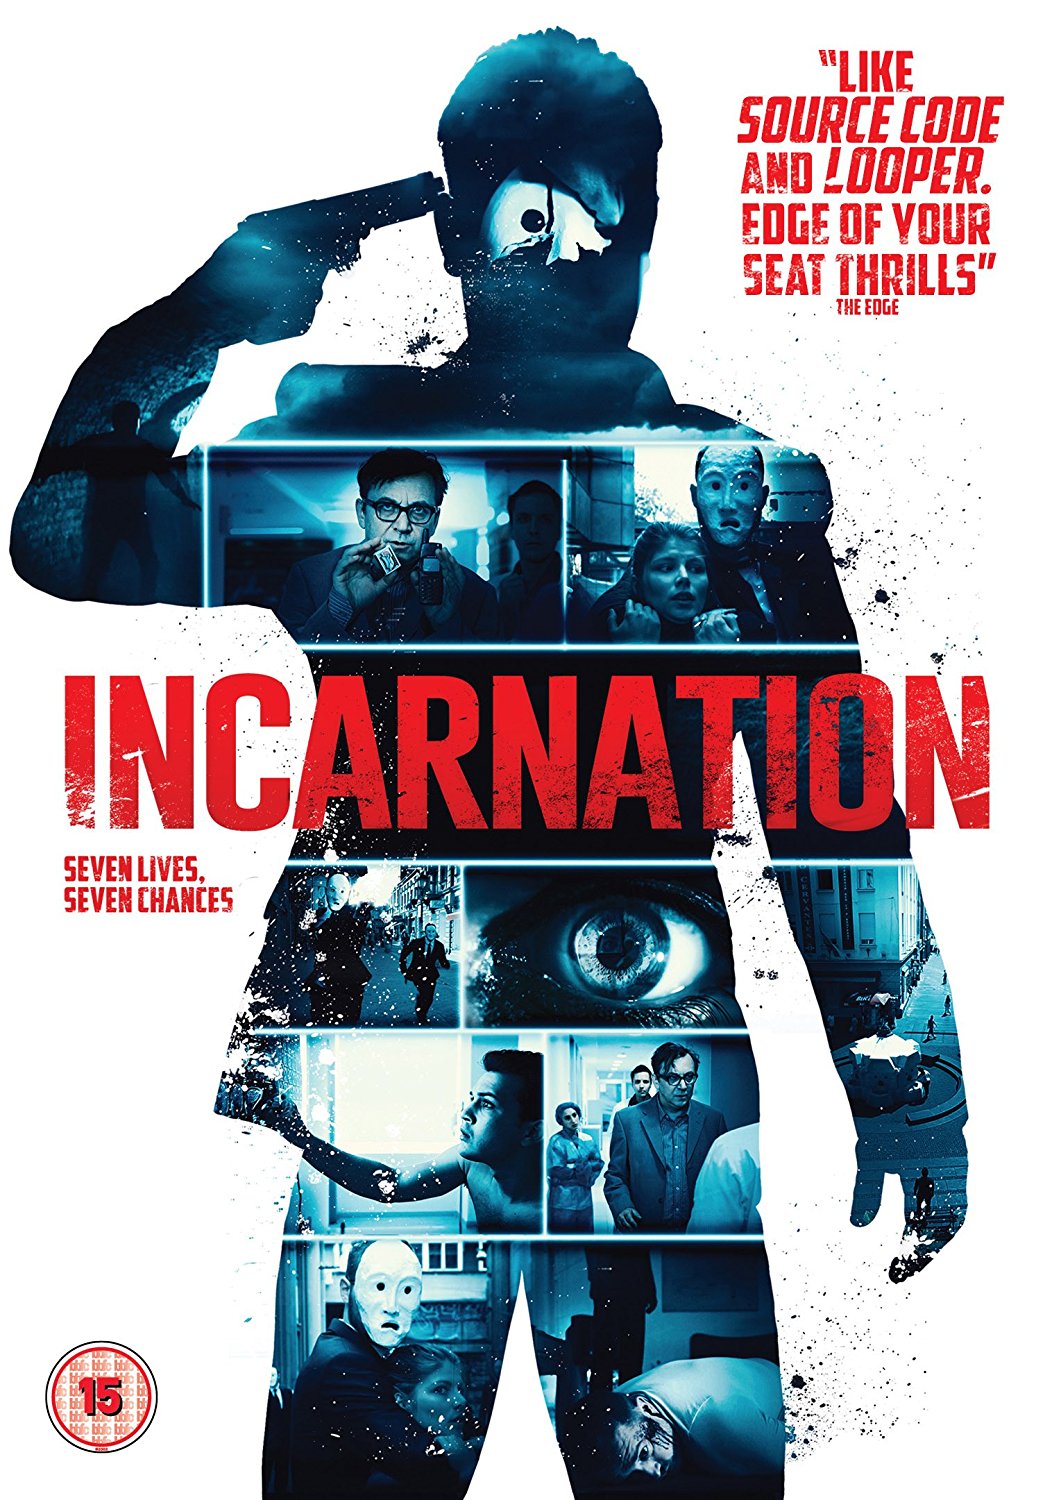 Incarnation DVD review: die, respawn, repeat